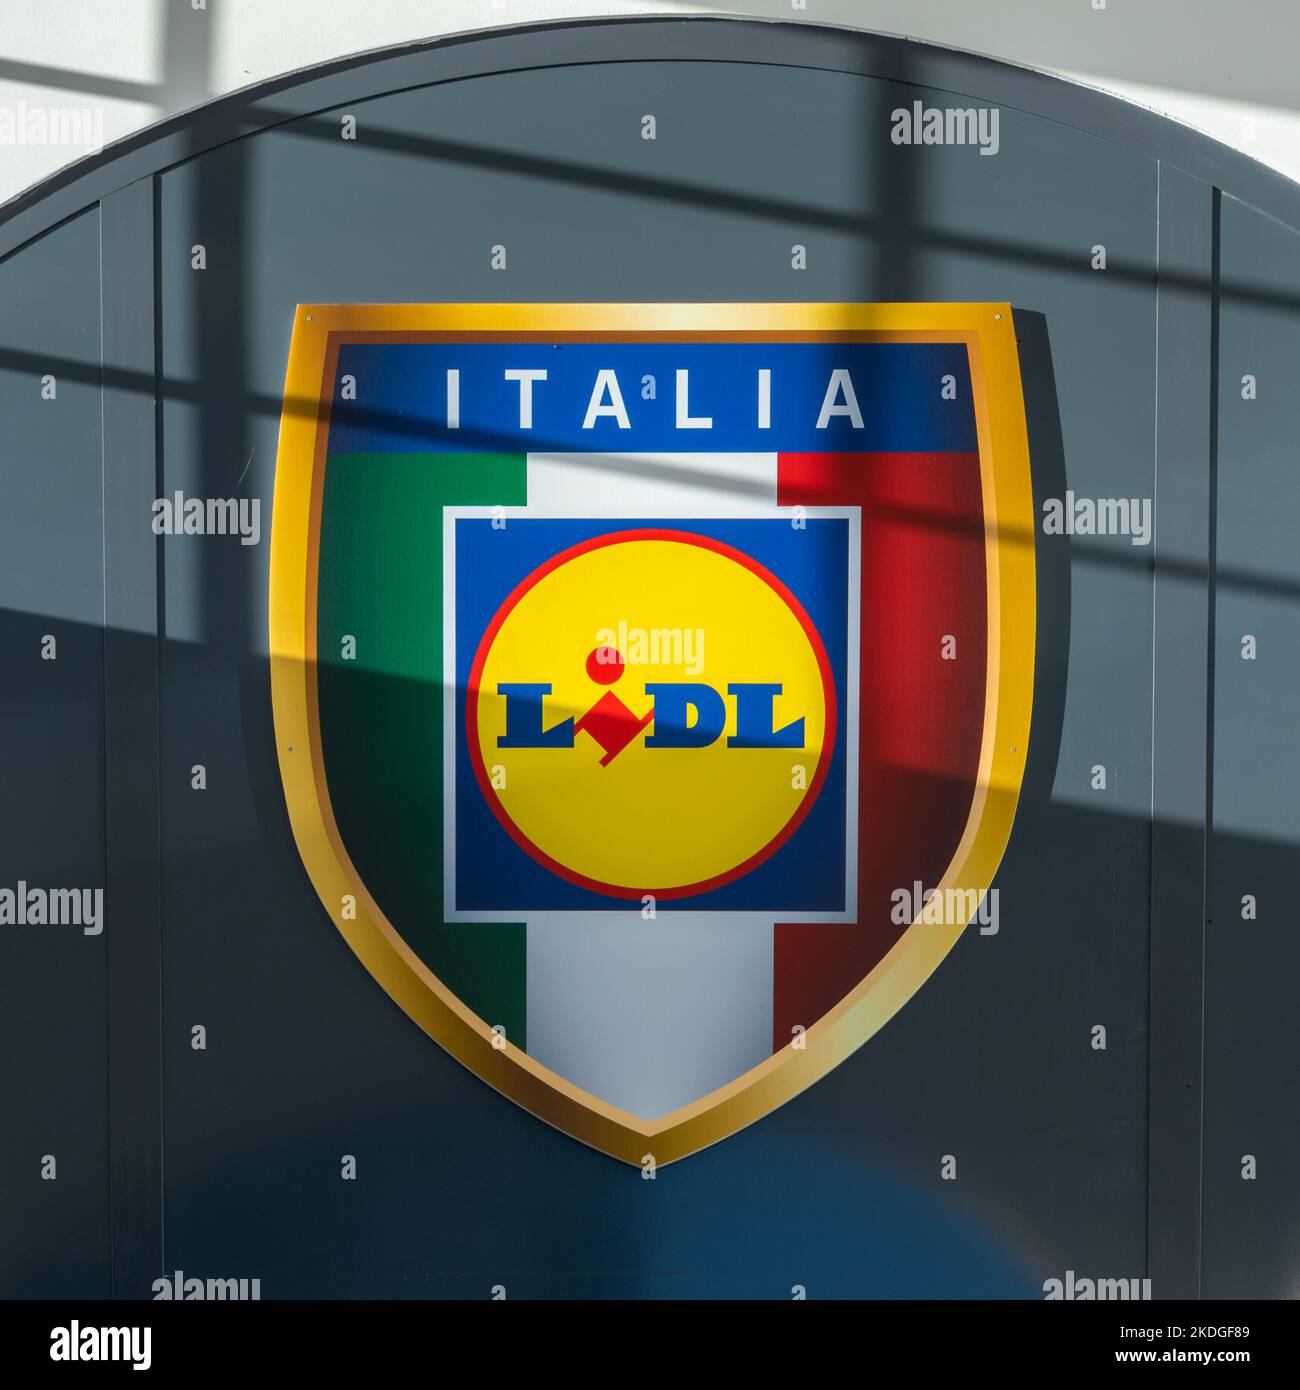 Carmagnola, Turin, Italy - November 05, 2022: the Lidl Italia logo on sign of the new Lidl discount store, Lidl Stiftung Co. KG is a European supermar Stock Photo